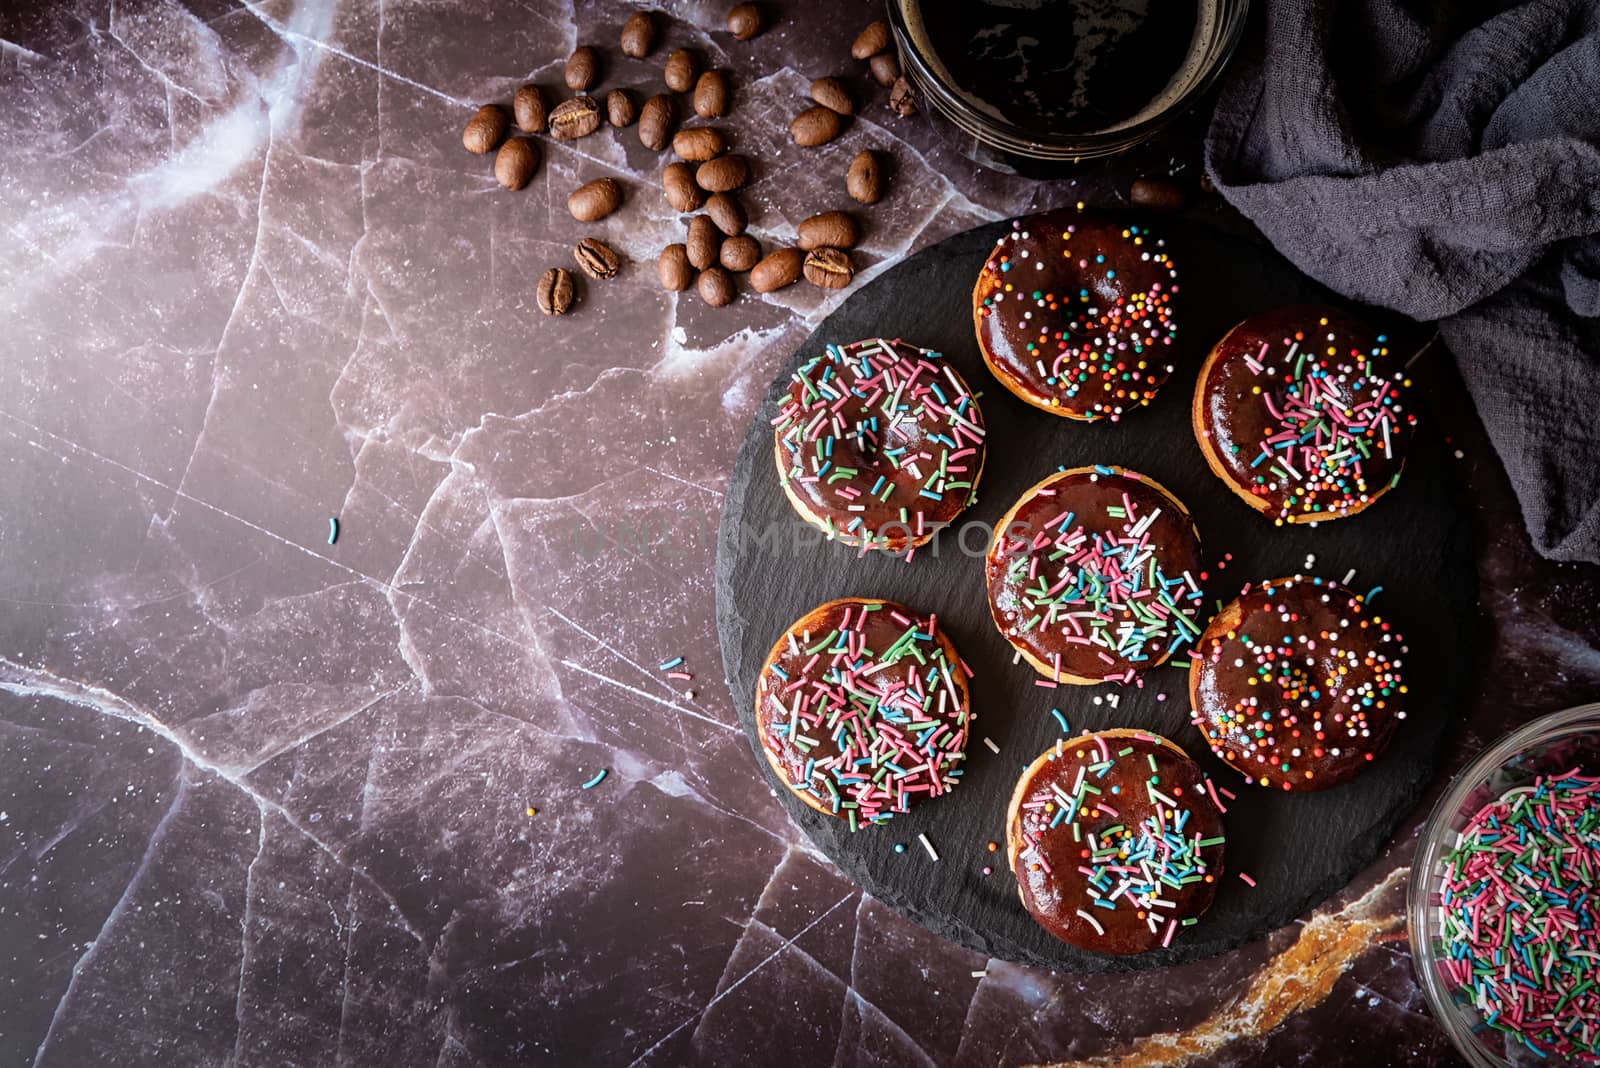 Fresh donuts with chocolate glaze and colorful sprinkles on dark background, top view copy space